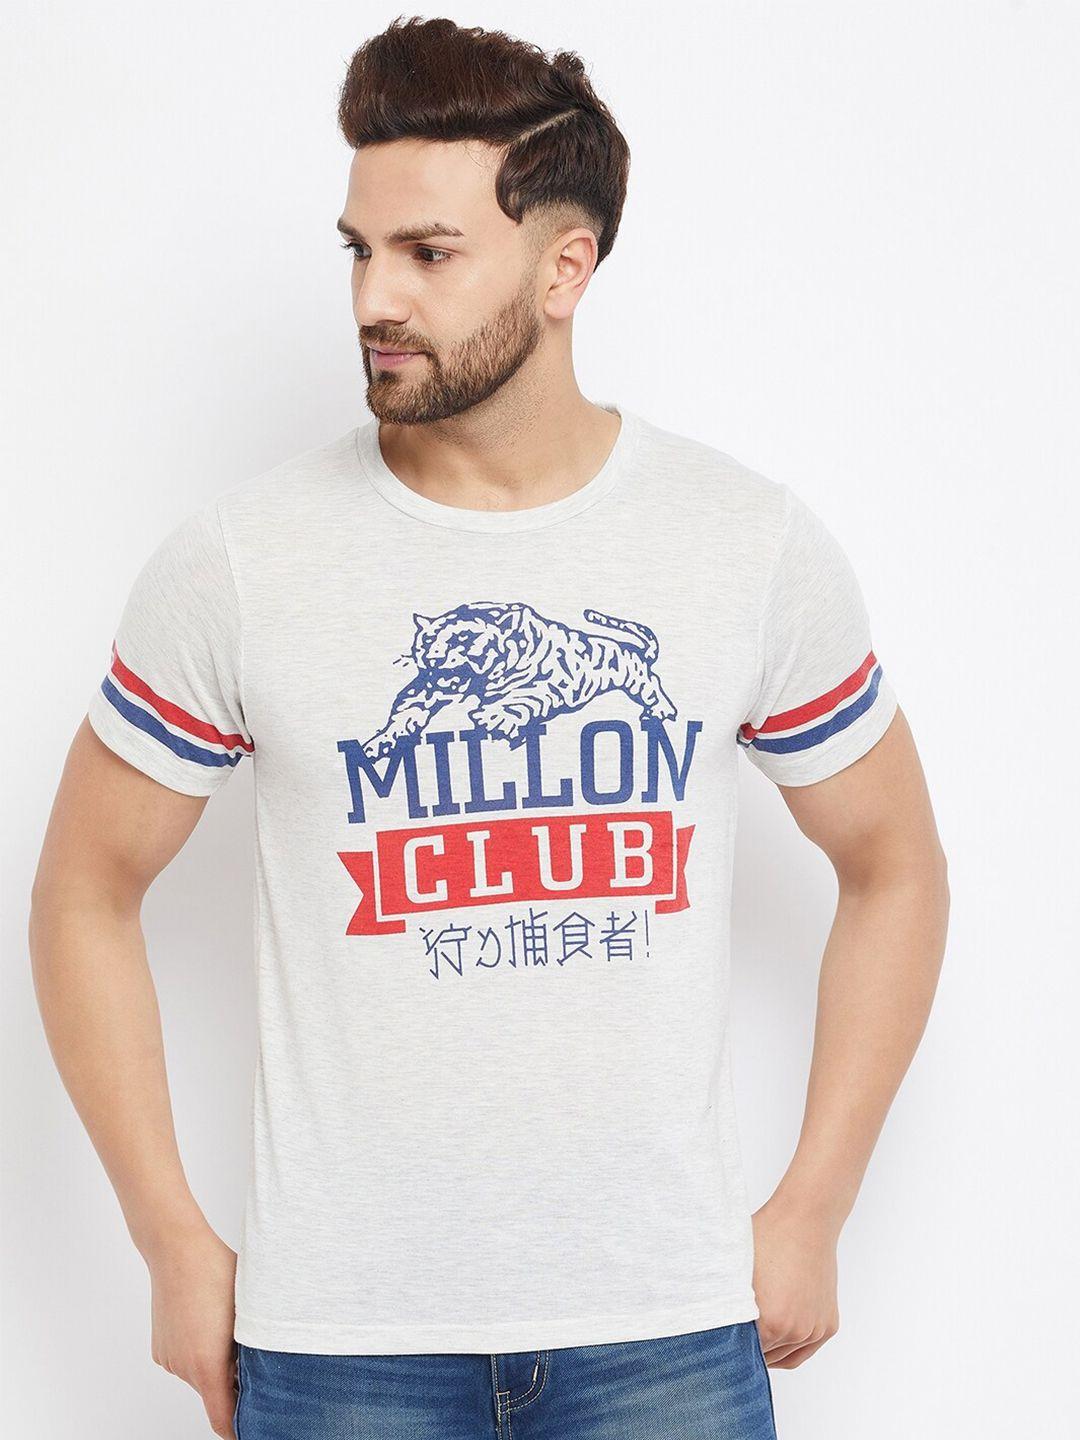 the-million-club-men-off-white-typography-printed-t-shirt